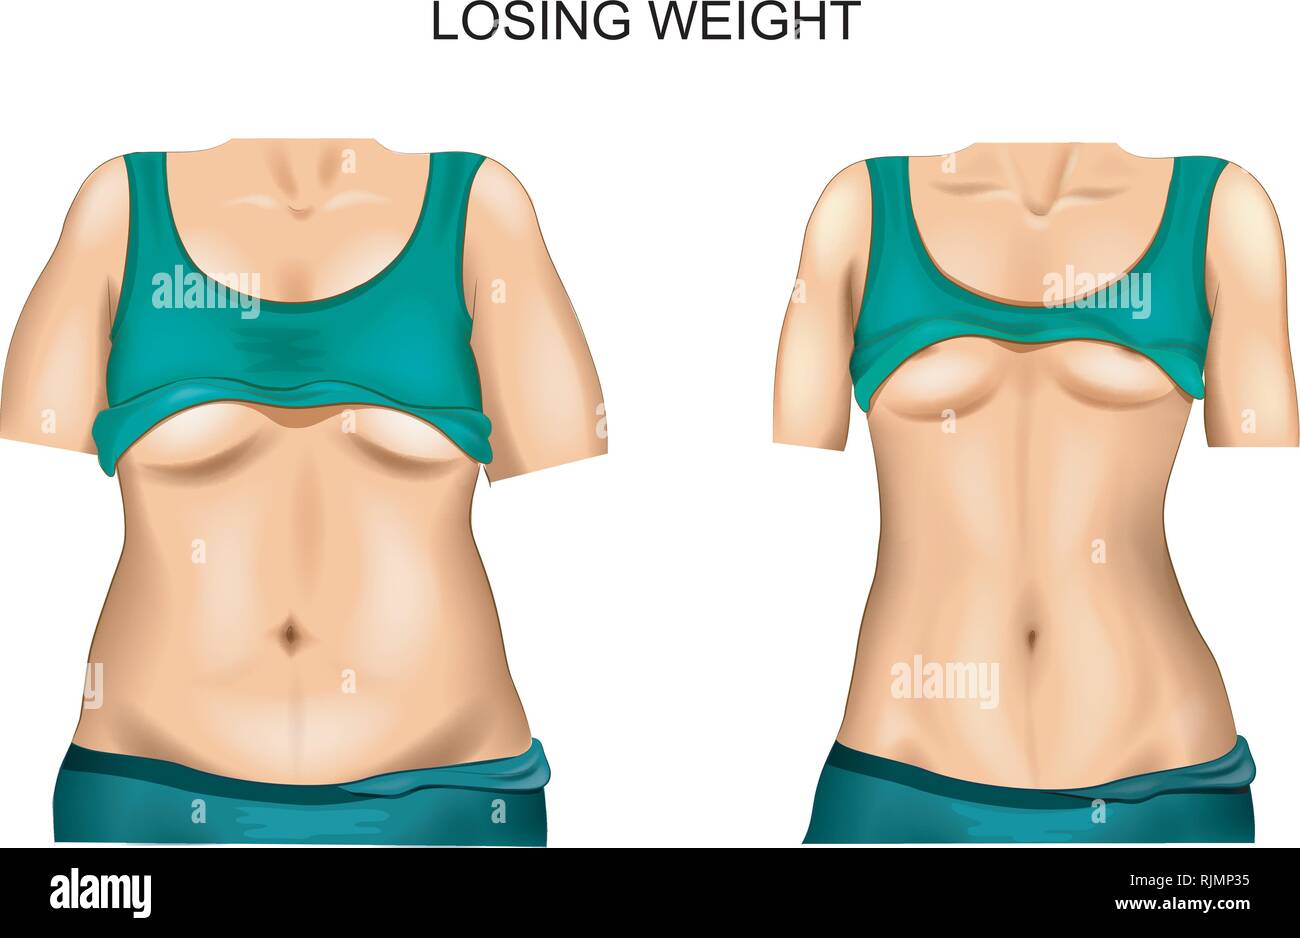 Premium Photo  Weight loss, slim body, healthy lifestyle concept.